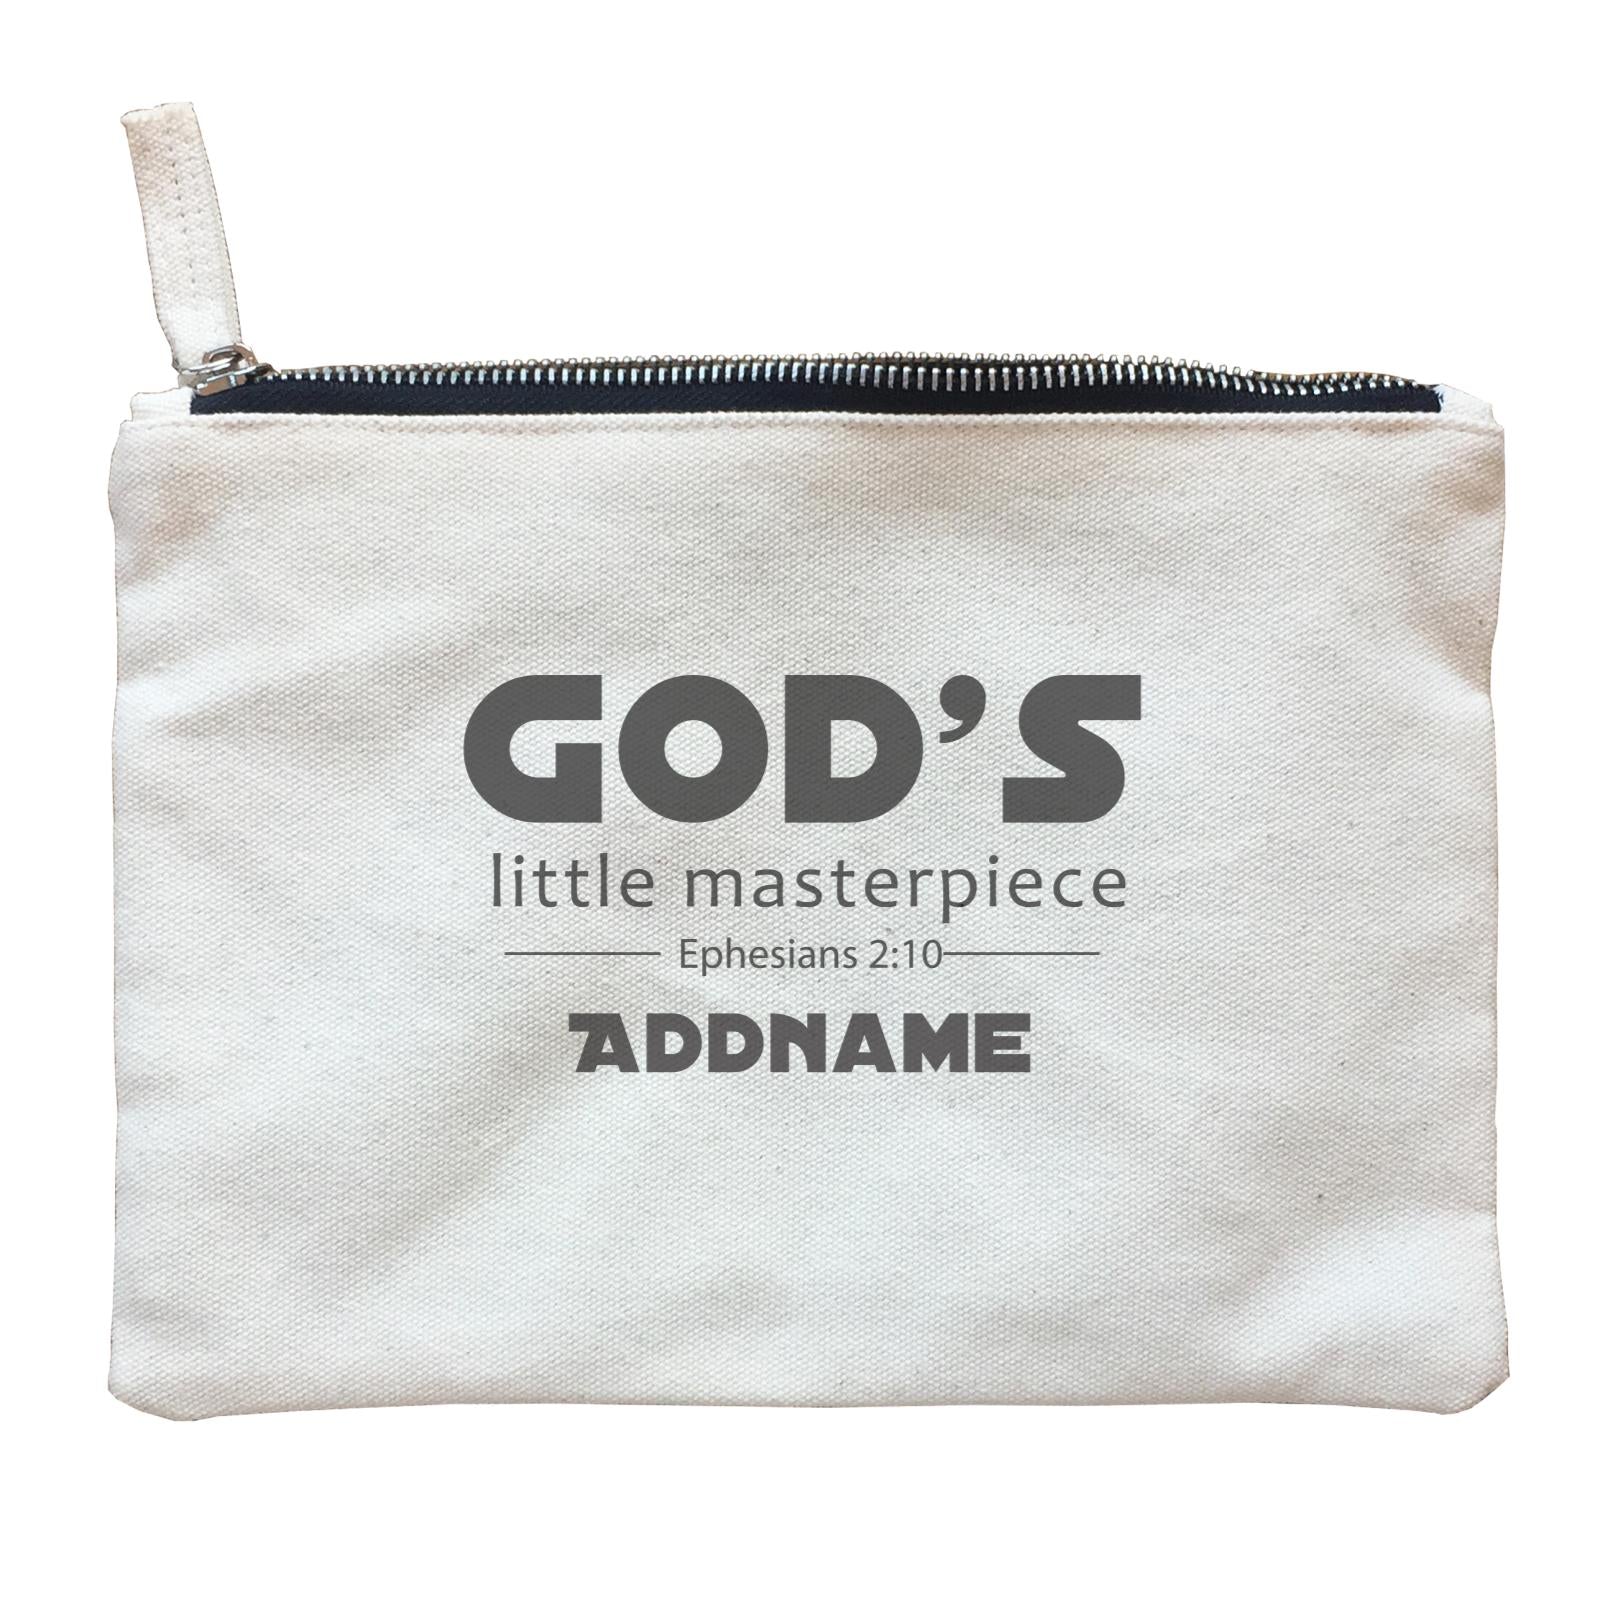 Christian Baby God's Little Masterpiece Ephesians 210 Addname Accessories Zipper Pouch